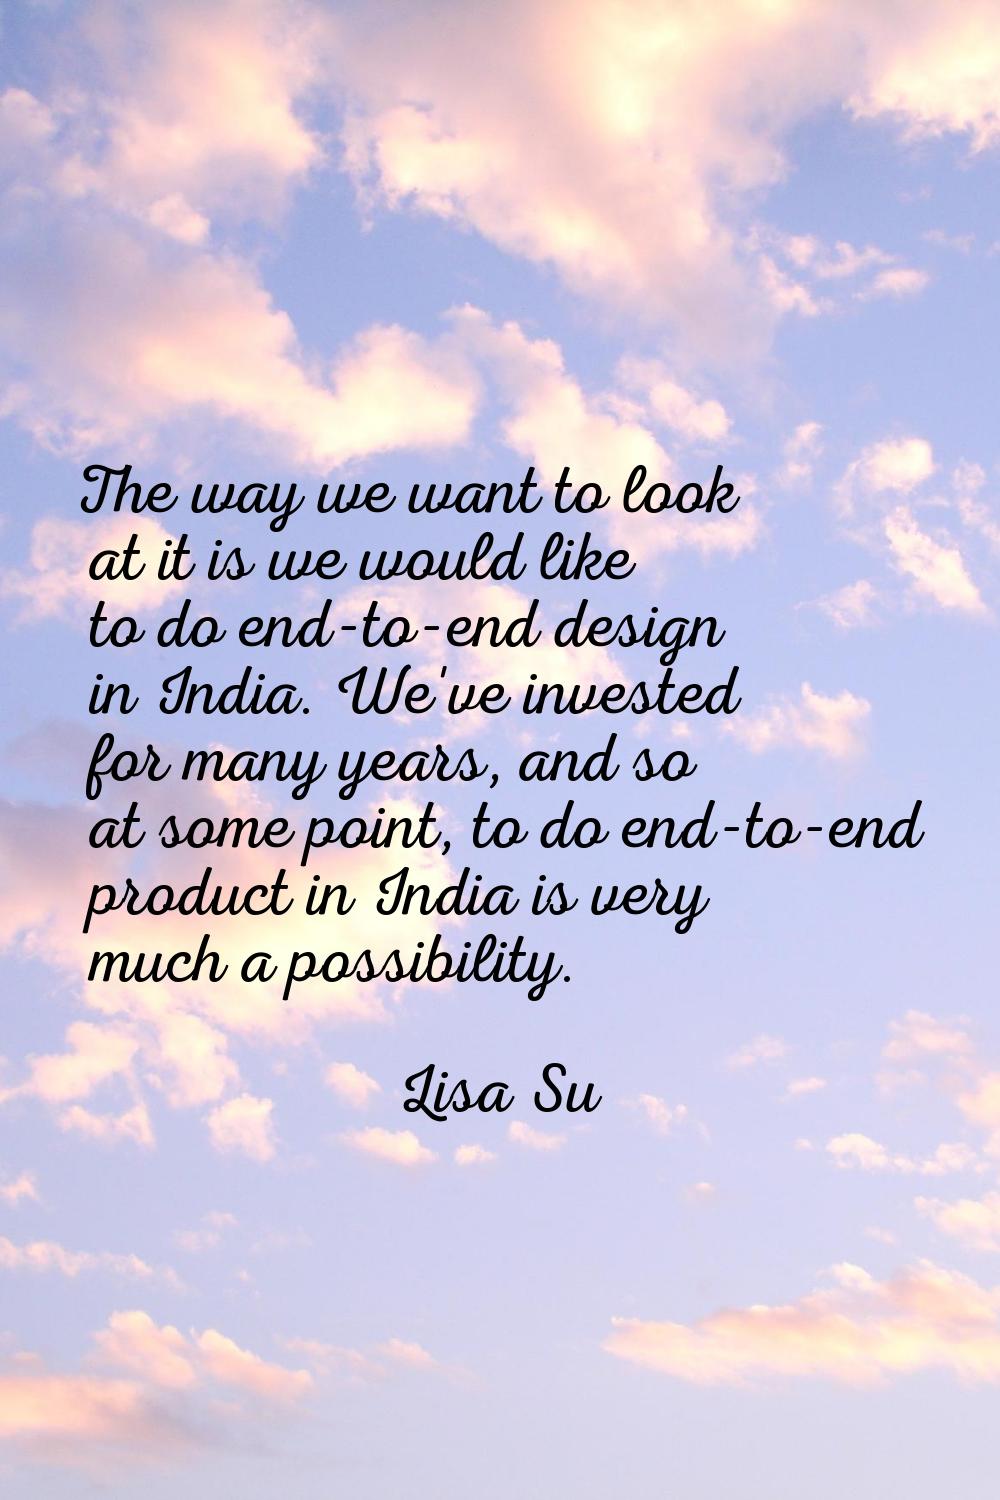 The way we want to look at it is we would like to do end-to-end design in India. We've invested for